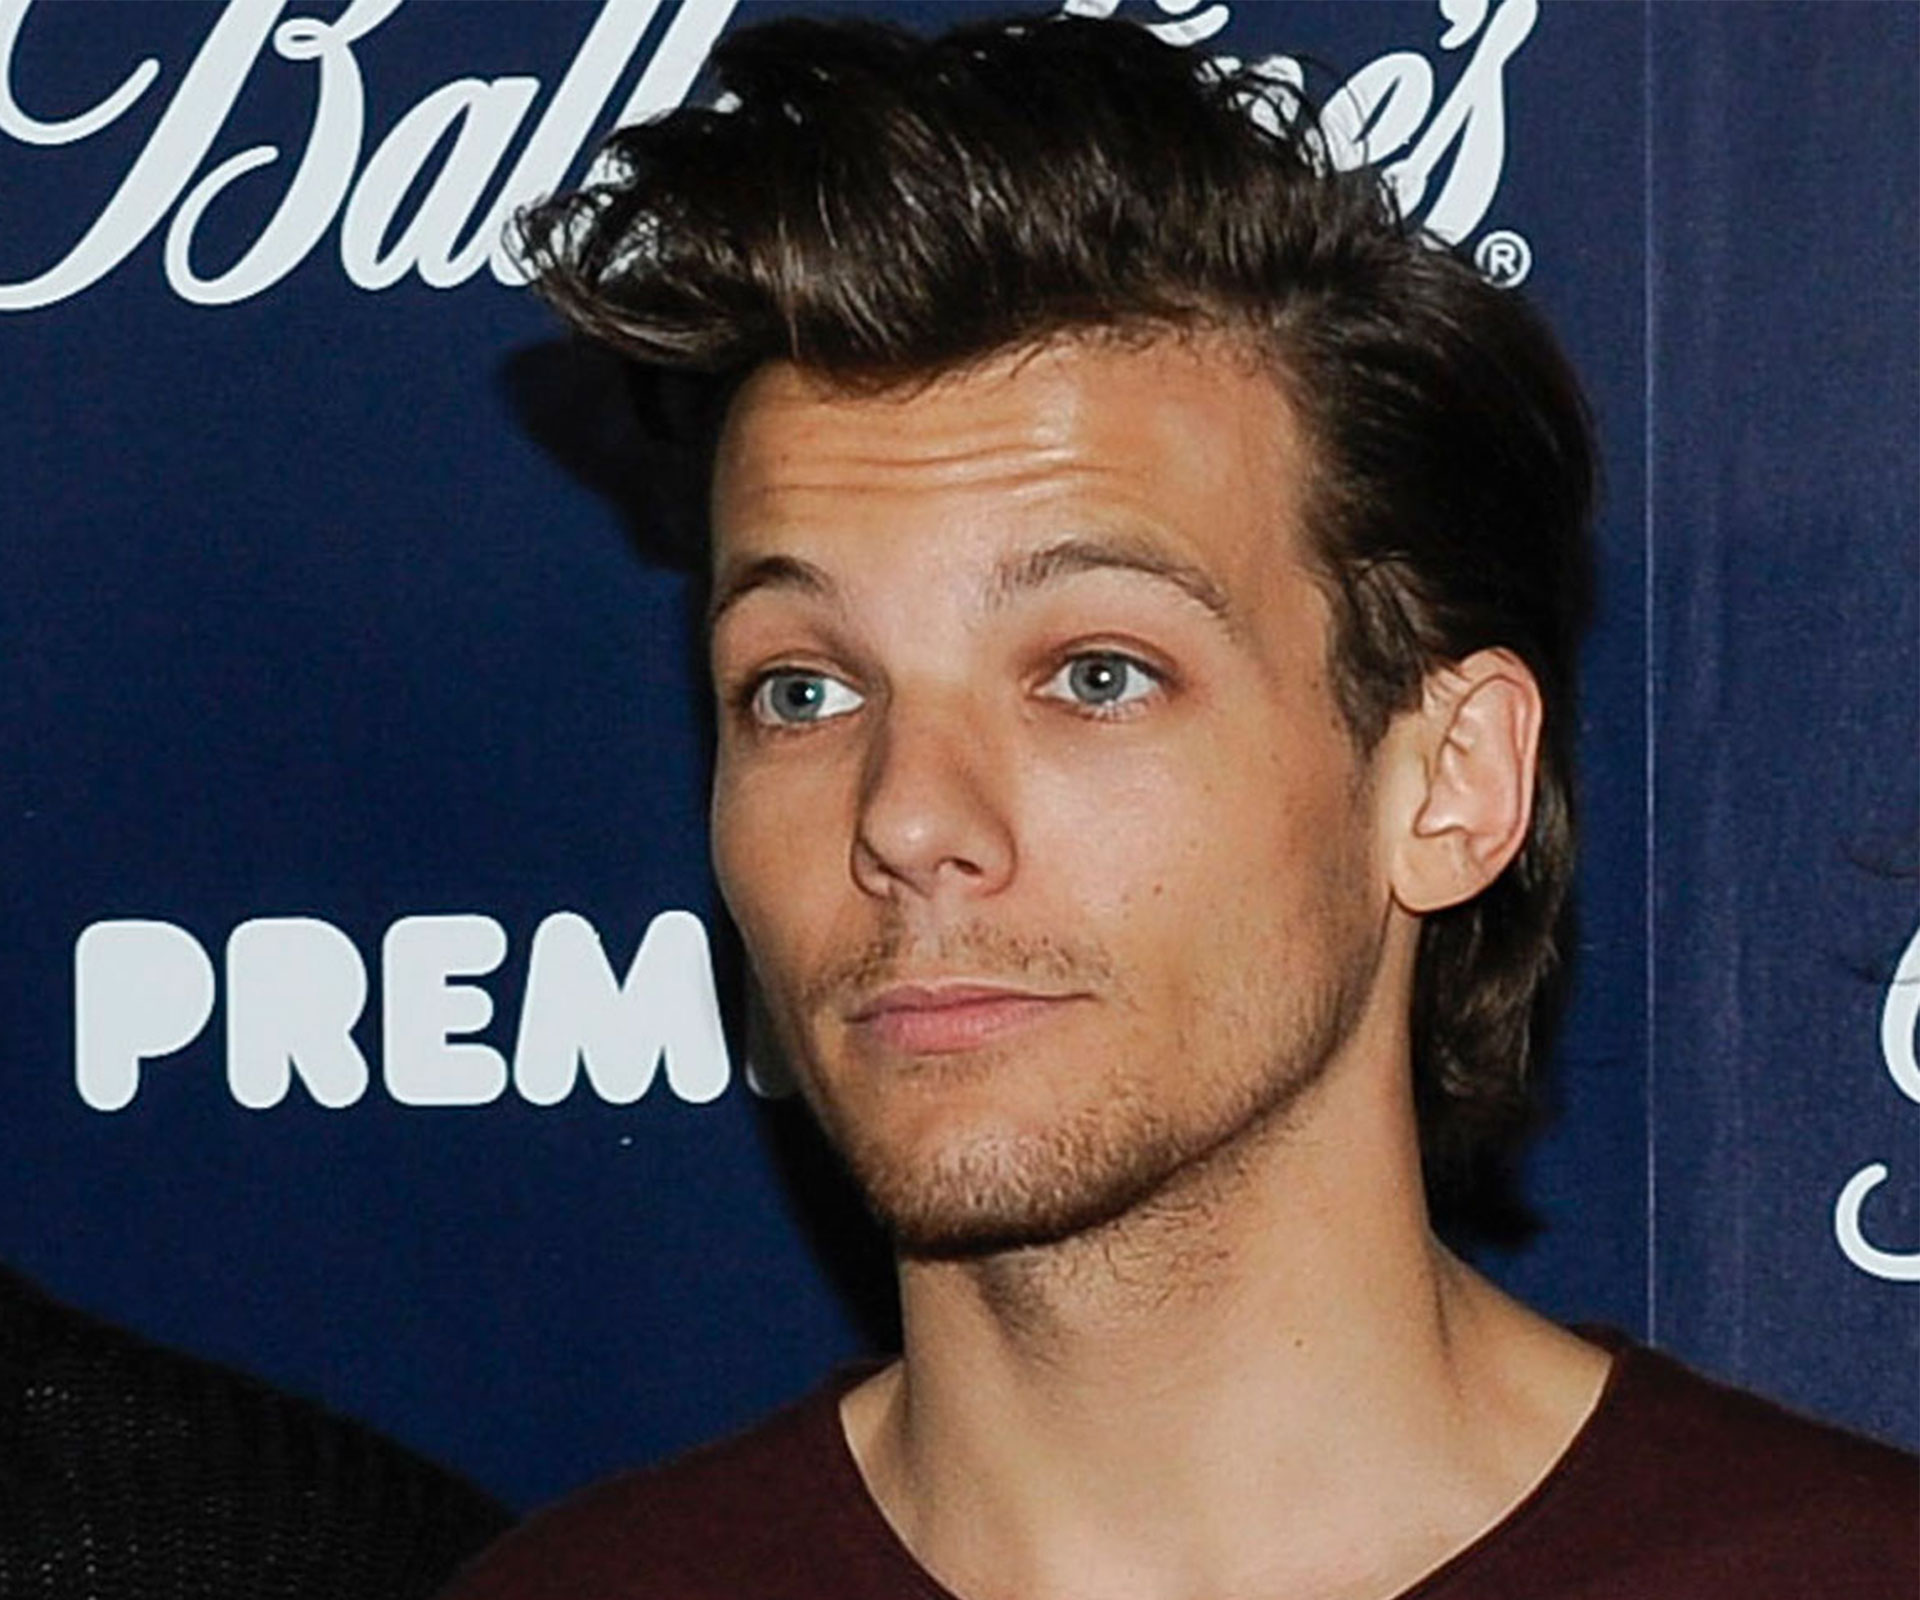 Louis Tomlinson confirms he's going to be a dad